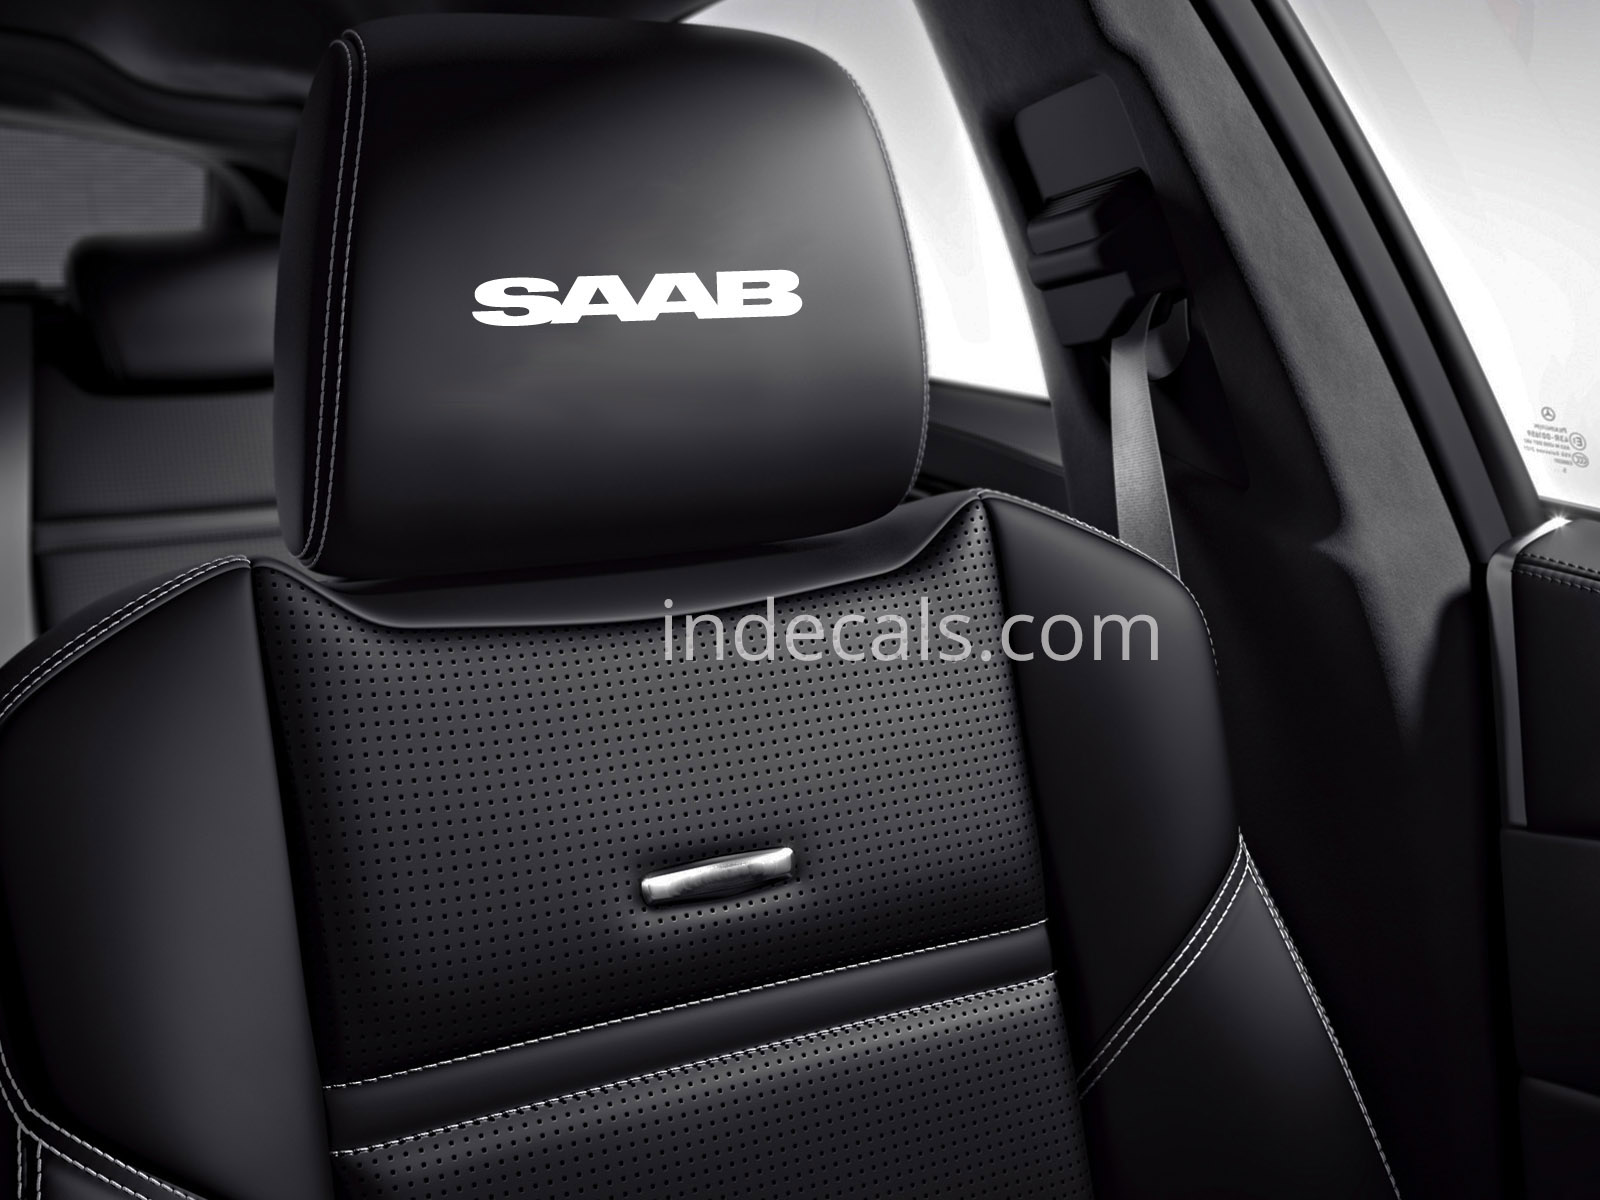 6 x Saab Stickers for Headrests - White